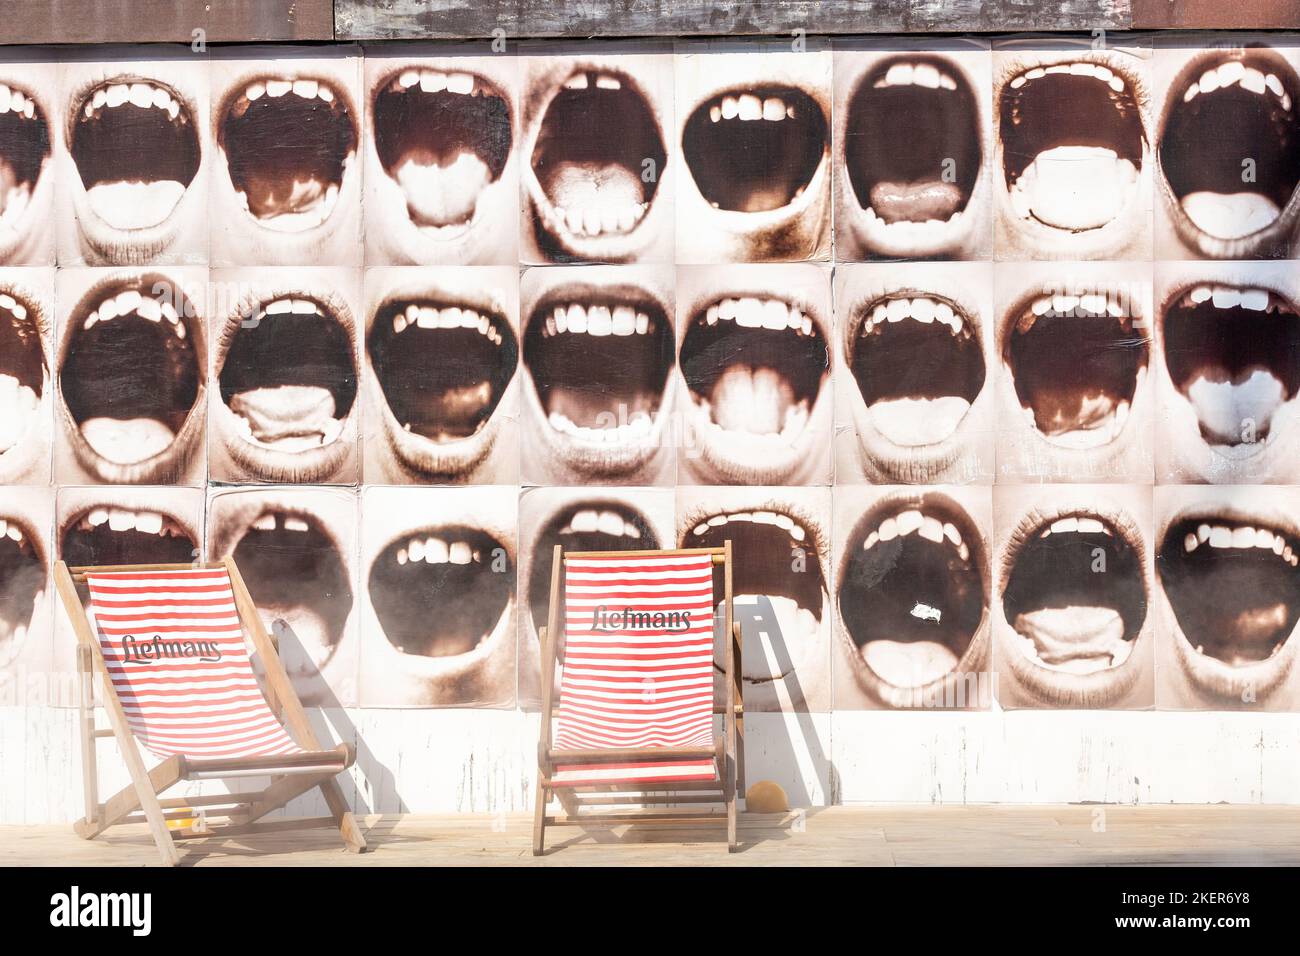 Two deckchairs in front of a wall illustrated with wide open human mouths. Brussels. Stock Photo